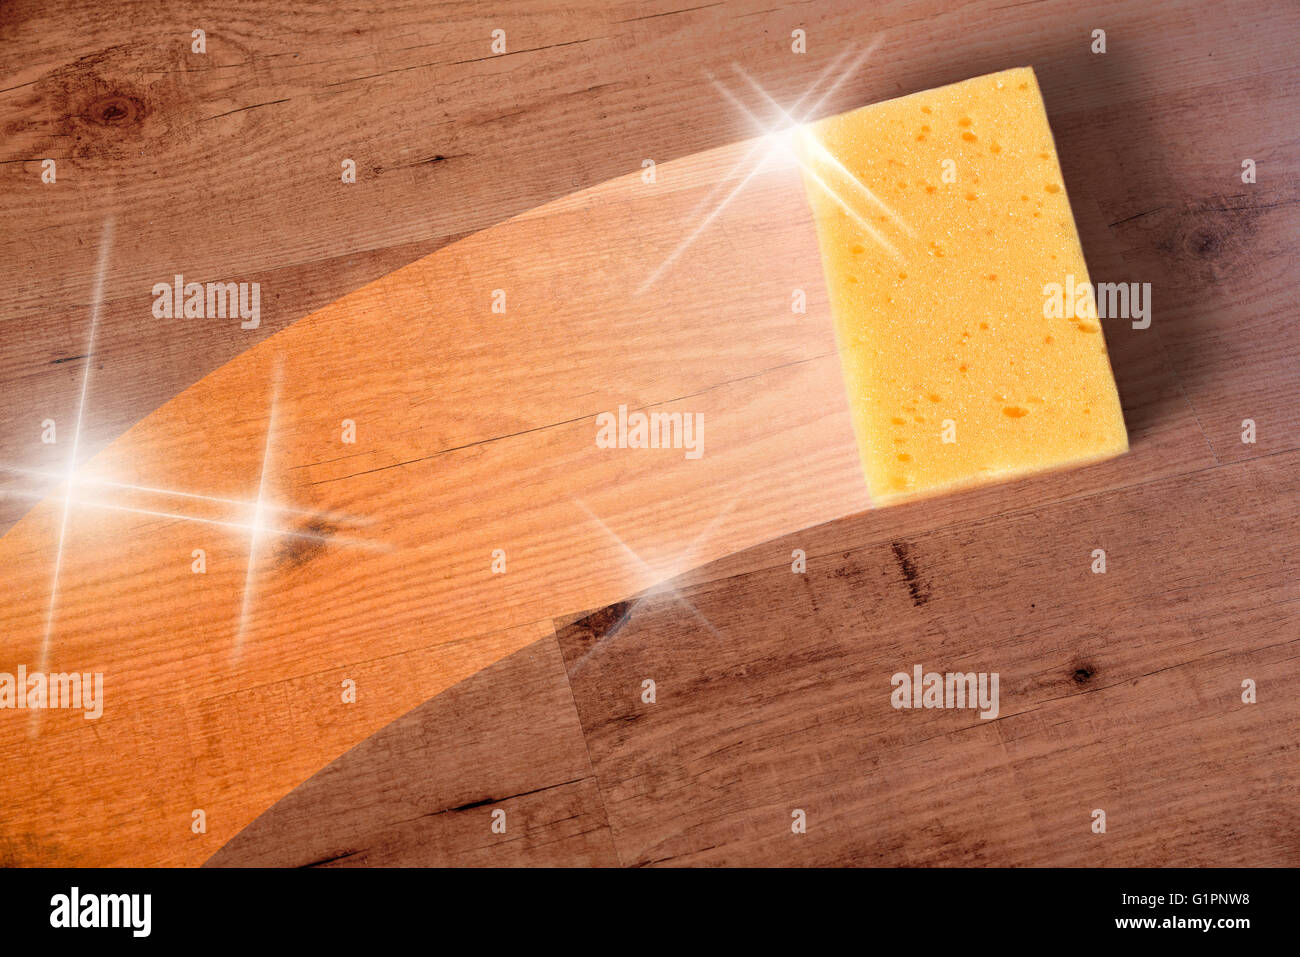 Cleaning wooden parquet concept with trace yellow sponge. Horizontal composition. Stock Photo